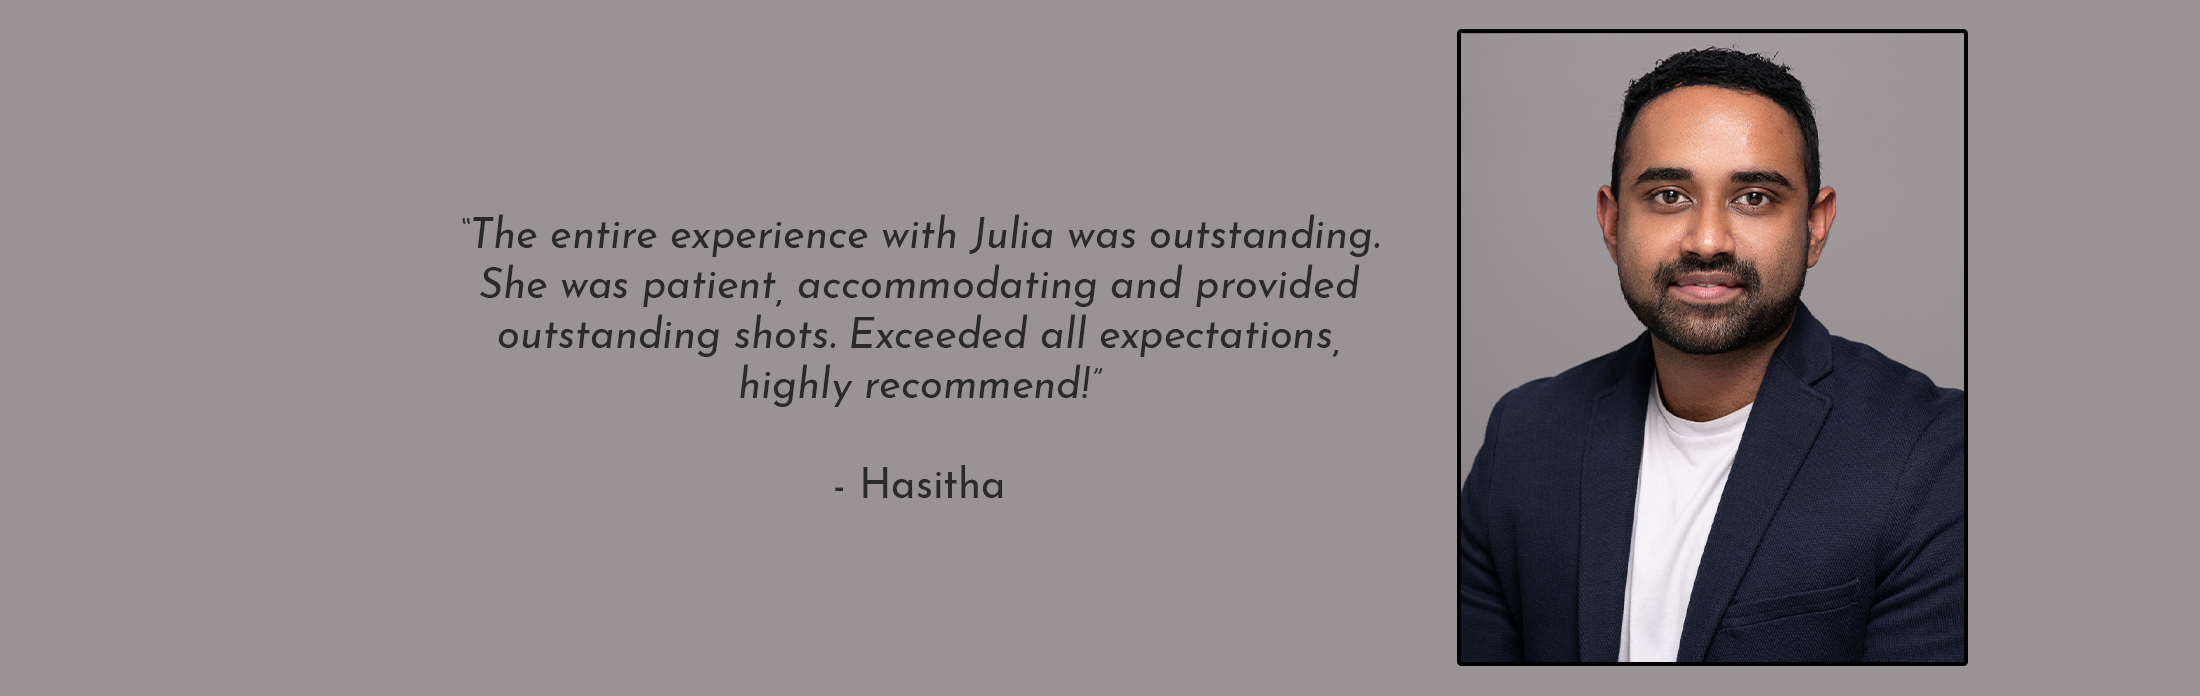 Text Reads: “The entire experience with Julia was outstanding. She was patient, accommodating and provided outstanding shots. Exceeded all expectations, highly recommend!” - Hasitha